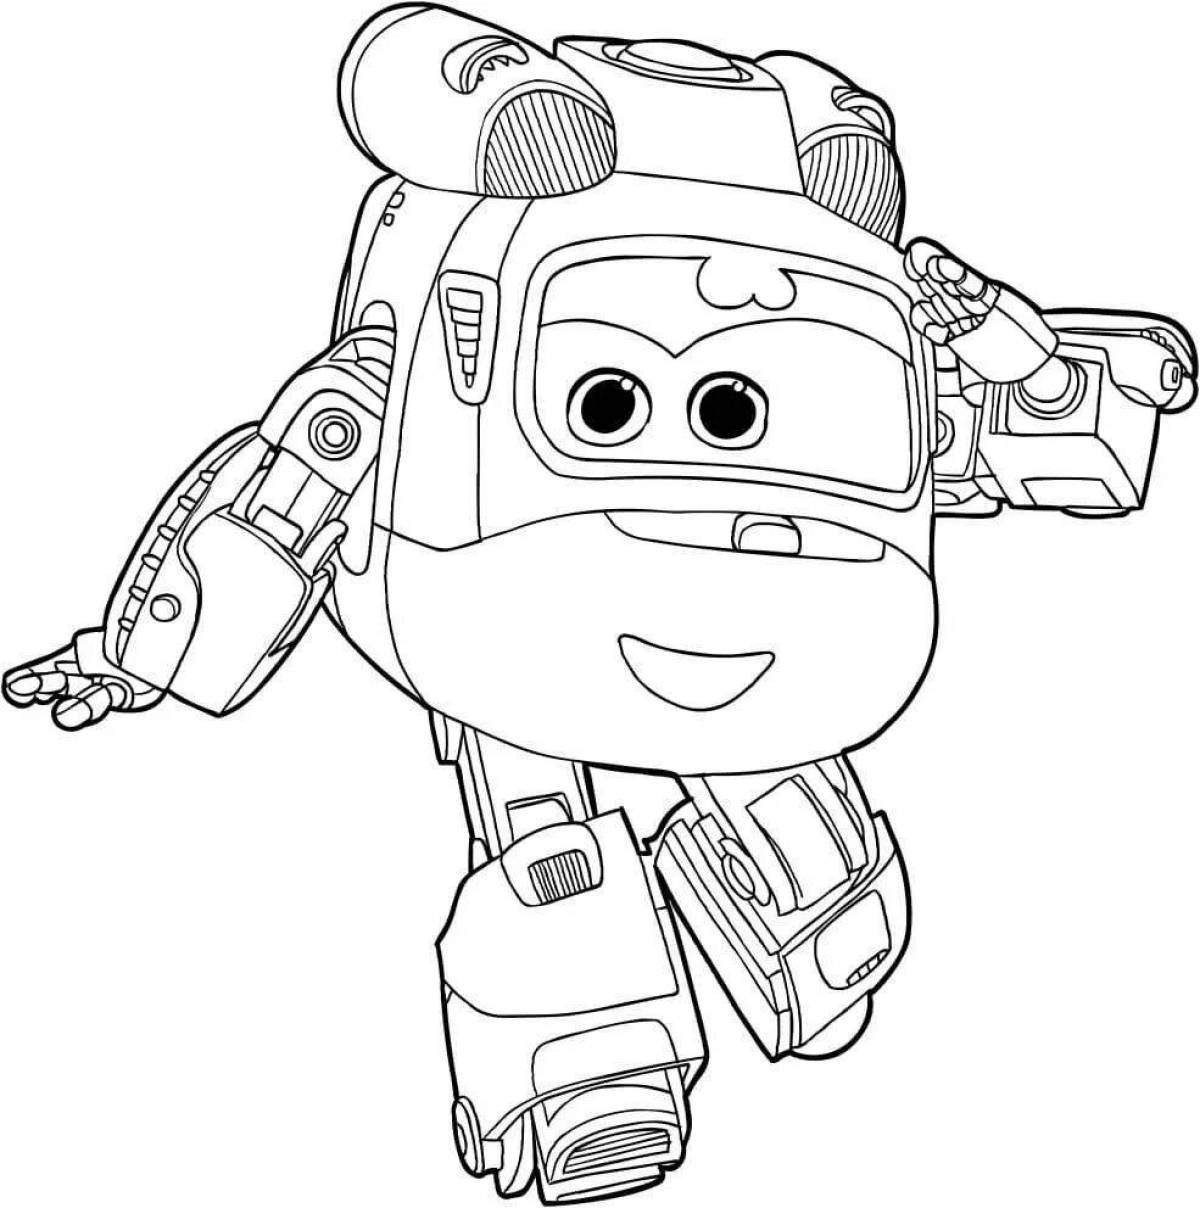 Adorable superwings and friends coloring page